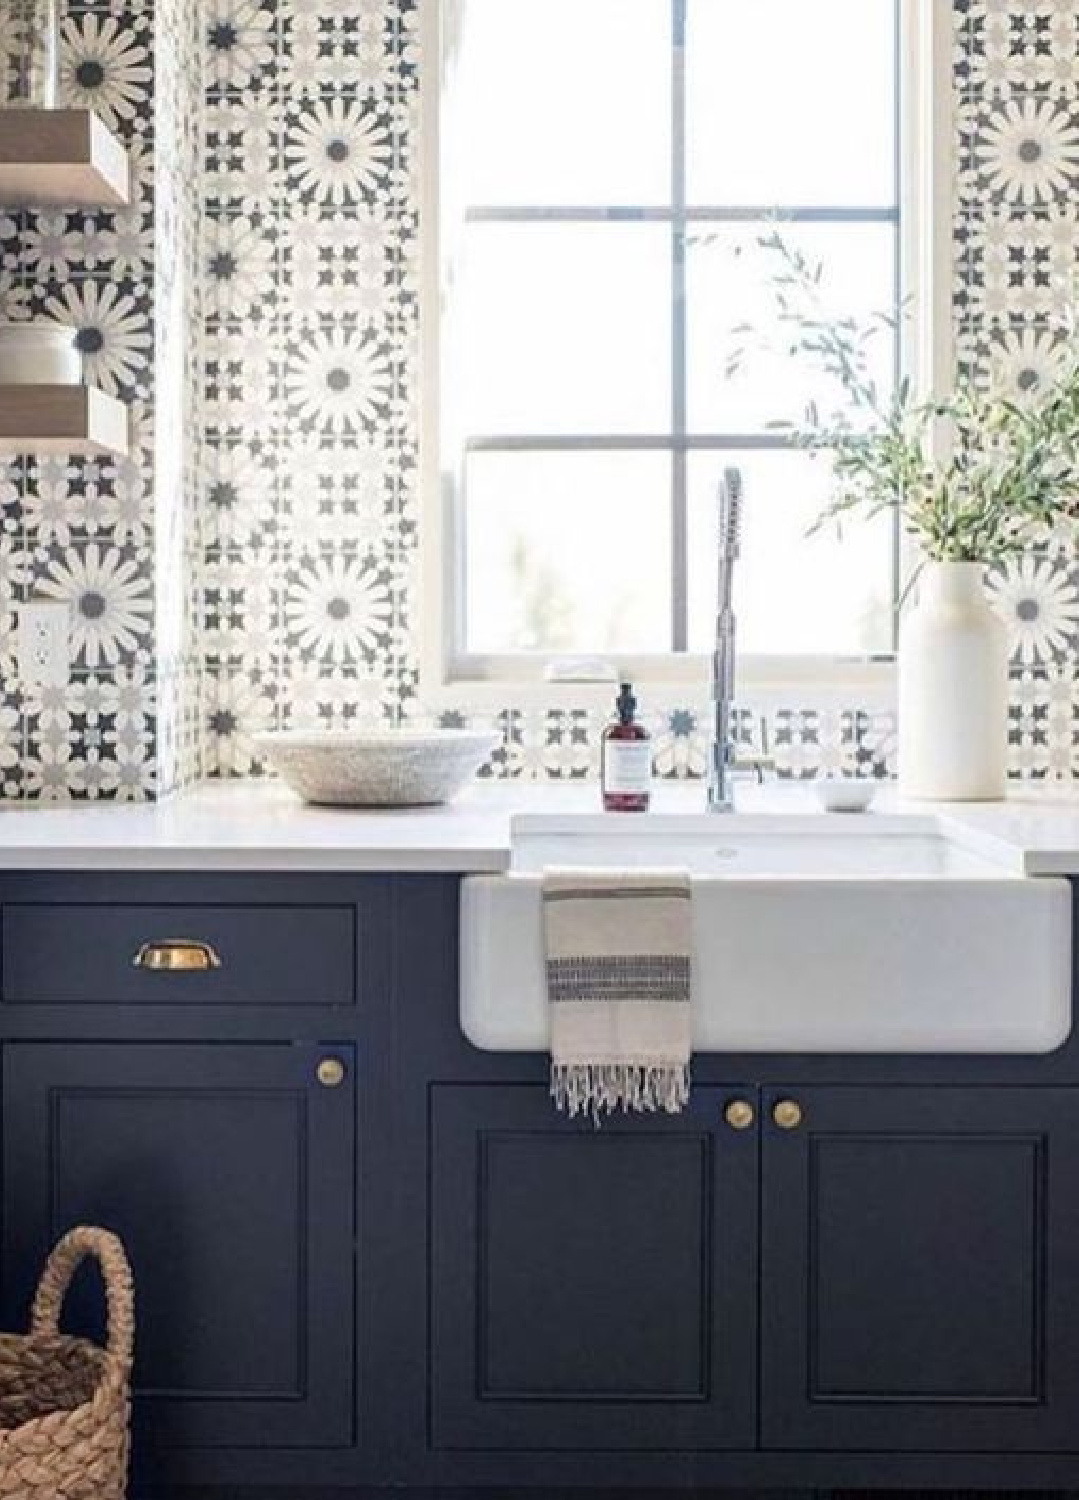 Stunning blue and white graphic tiles on sink wall of a kitchen with navy blue cabinets and farm sink. Come see 36 Best Beautiful Blue and White Kitchens to Love! #blueandwhite #bluekitchen #kitchendesign #kitchendecor #decorinspiration #beautifulkitchen